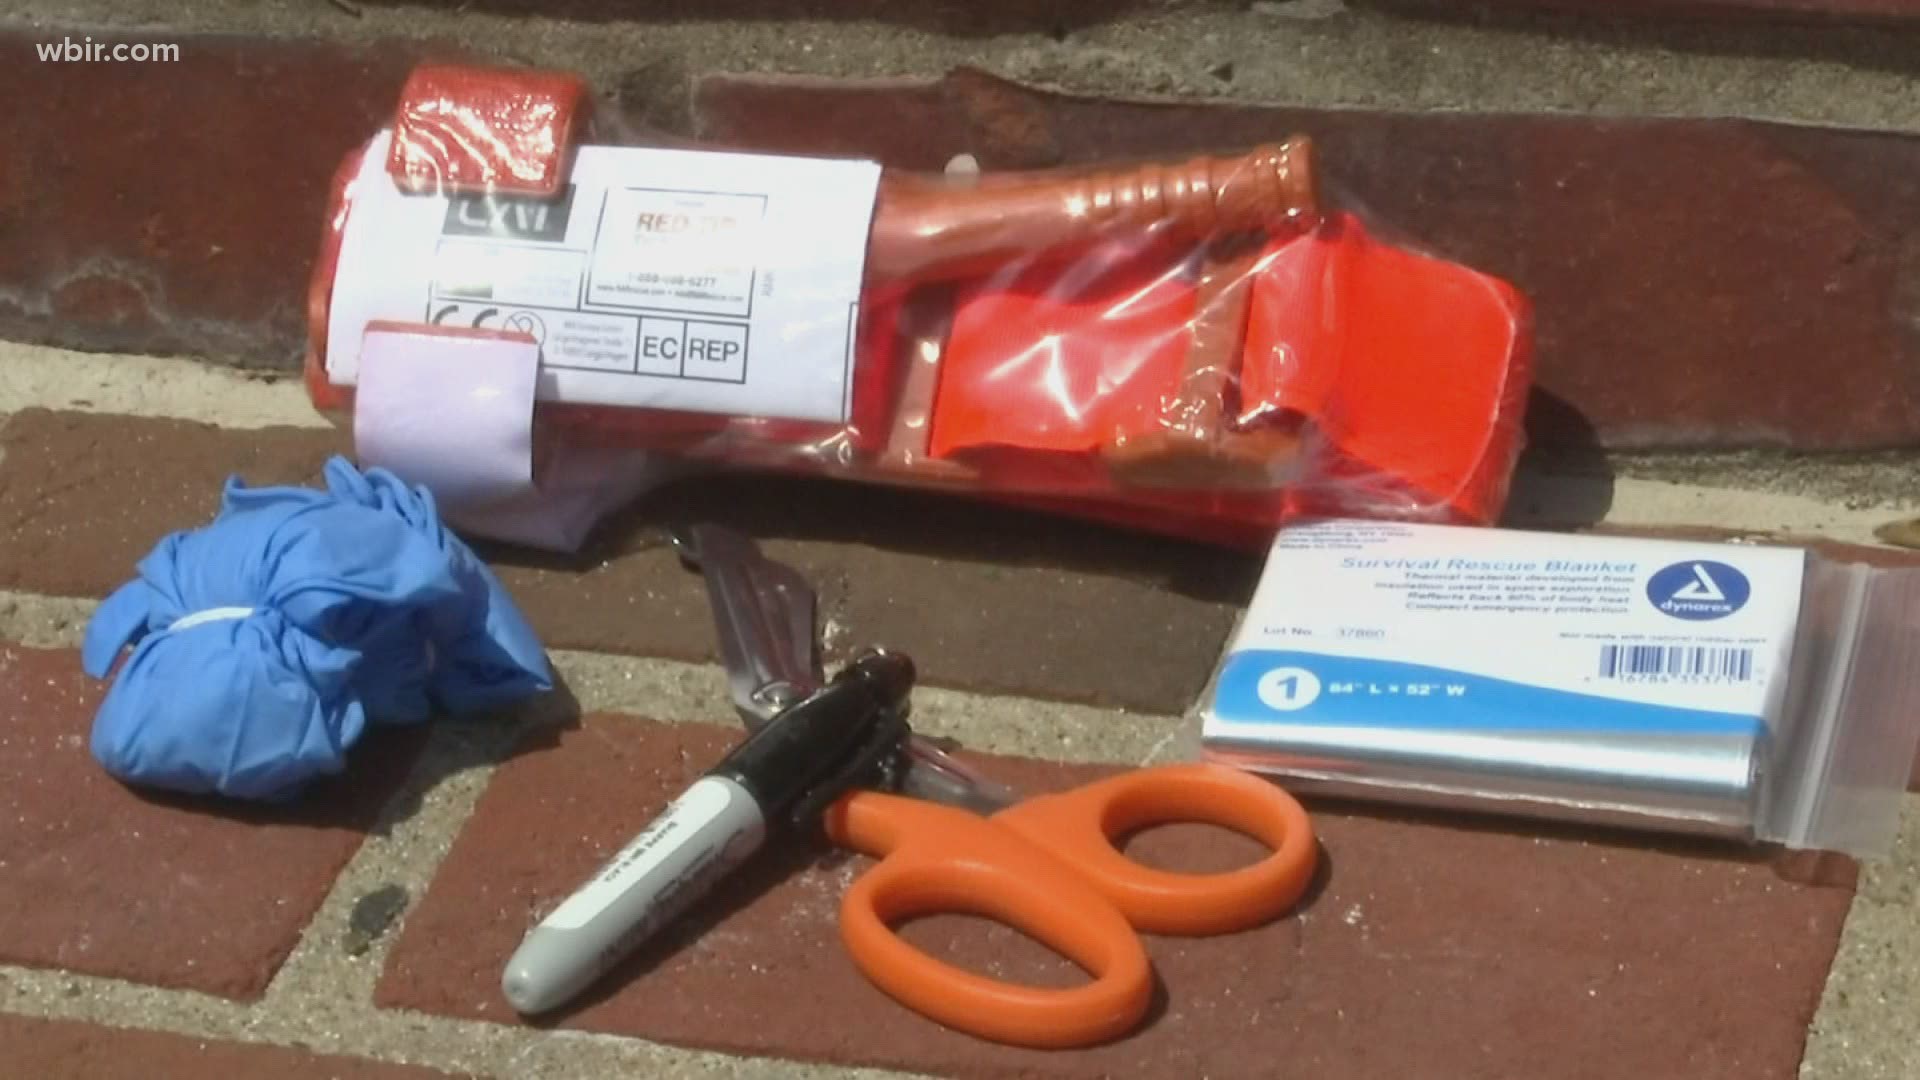 The bill would allow schools to develop and implement a "Stop the Bleed" campaign, training educators on how to use trauma kits.